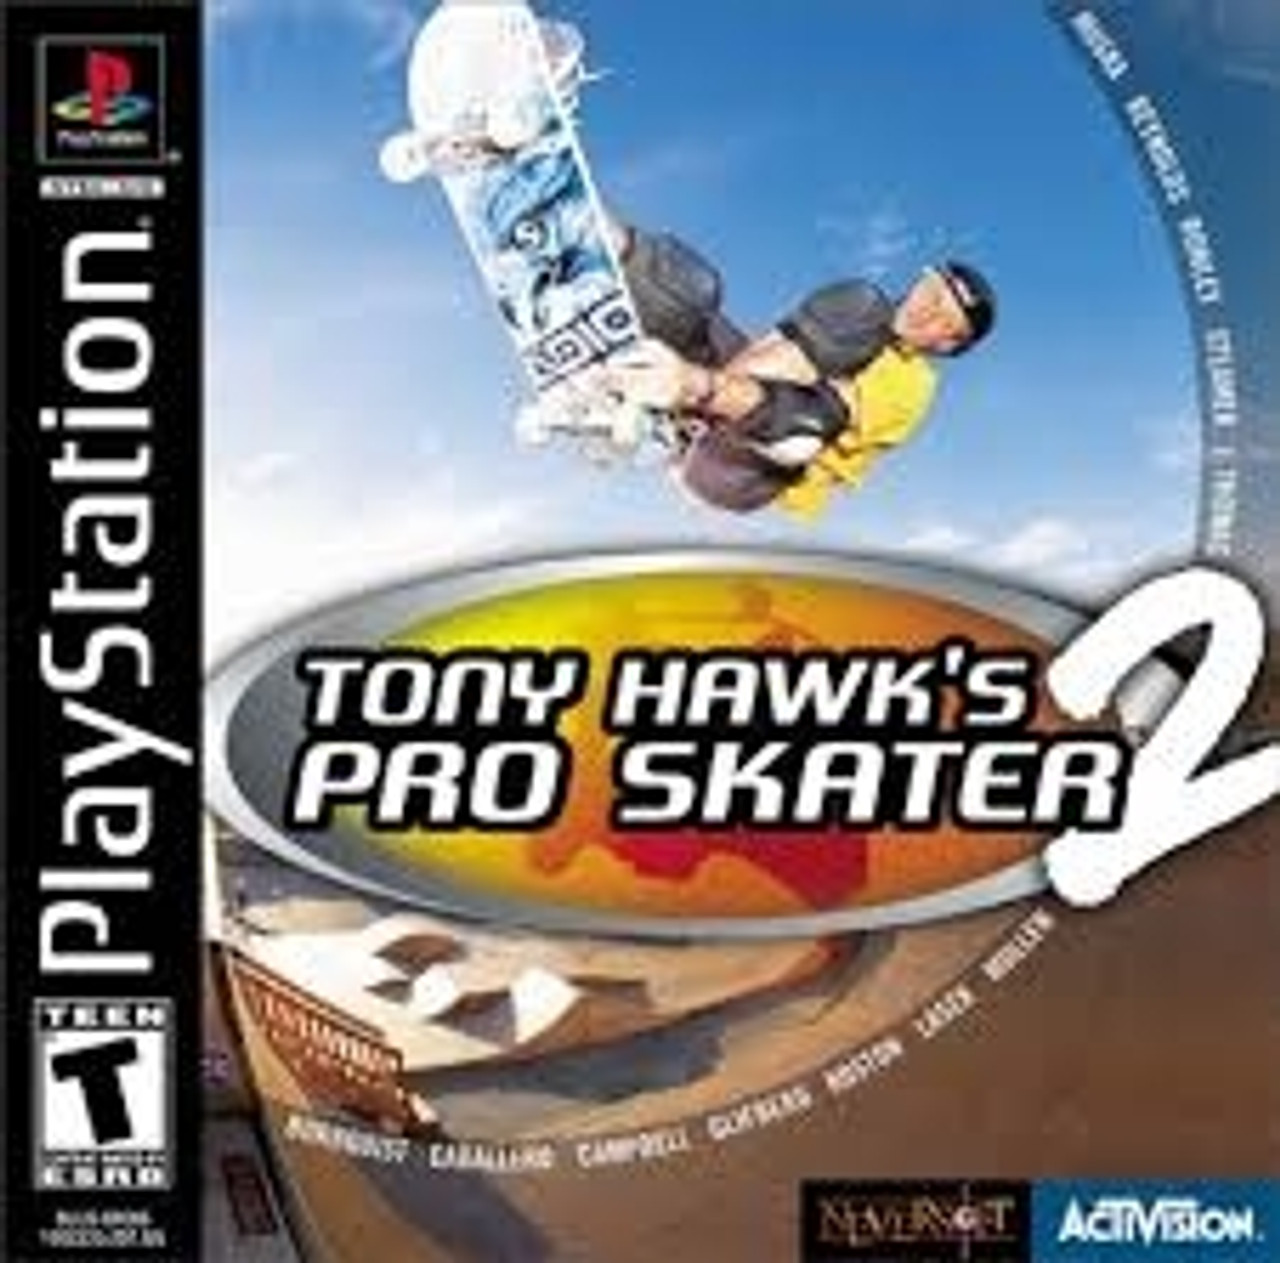 Tony Hawk's Pro Skater 2 Playstation 1 PS1 Game For Sale